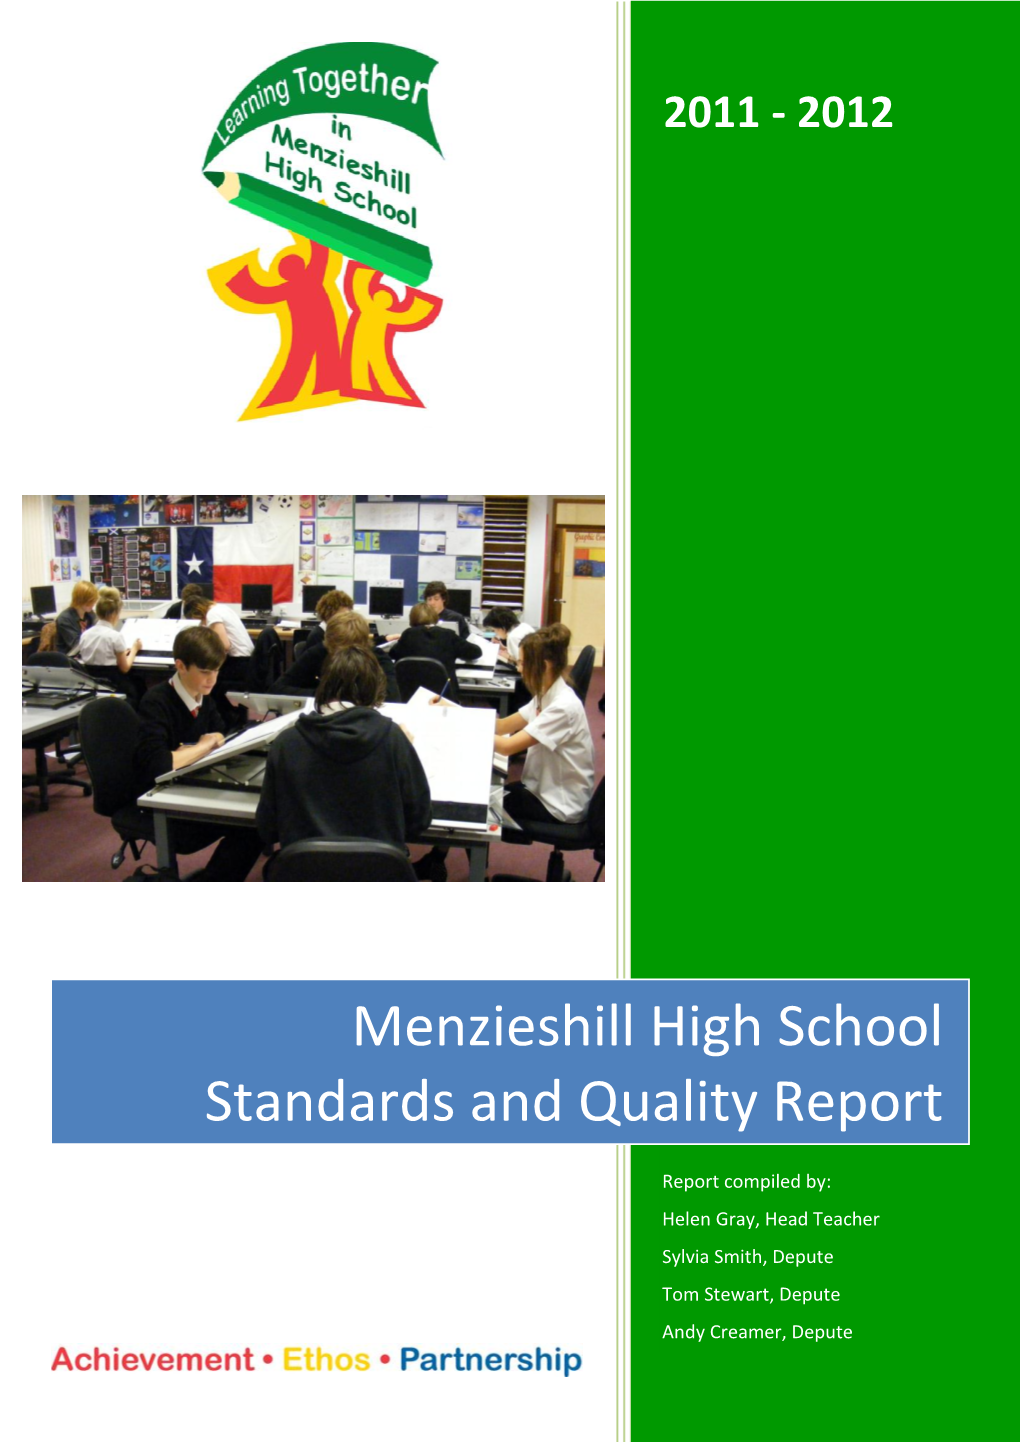 Menzieshill High School Standards and Quality Report